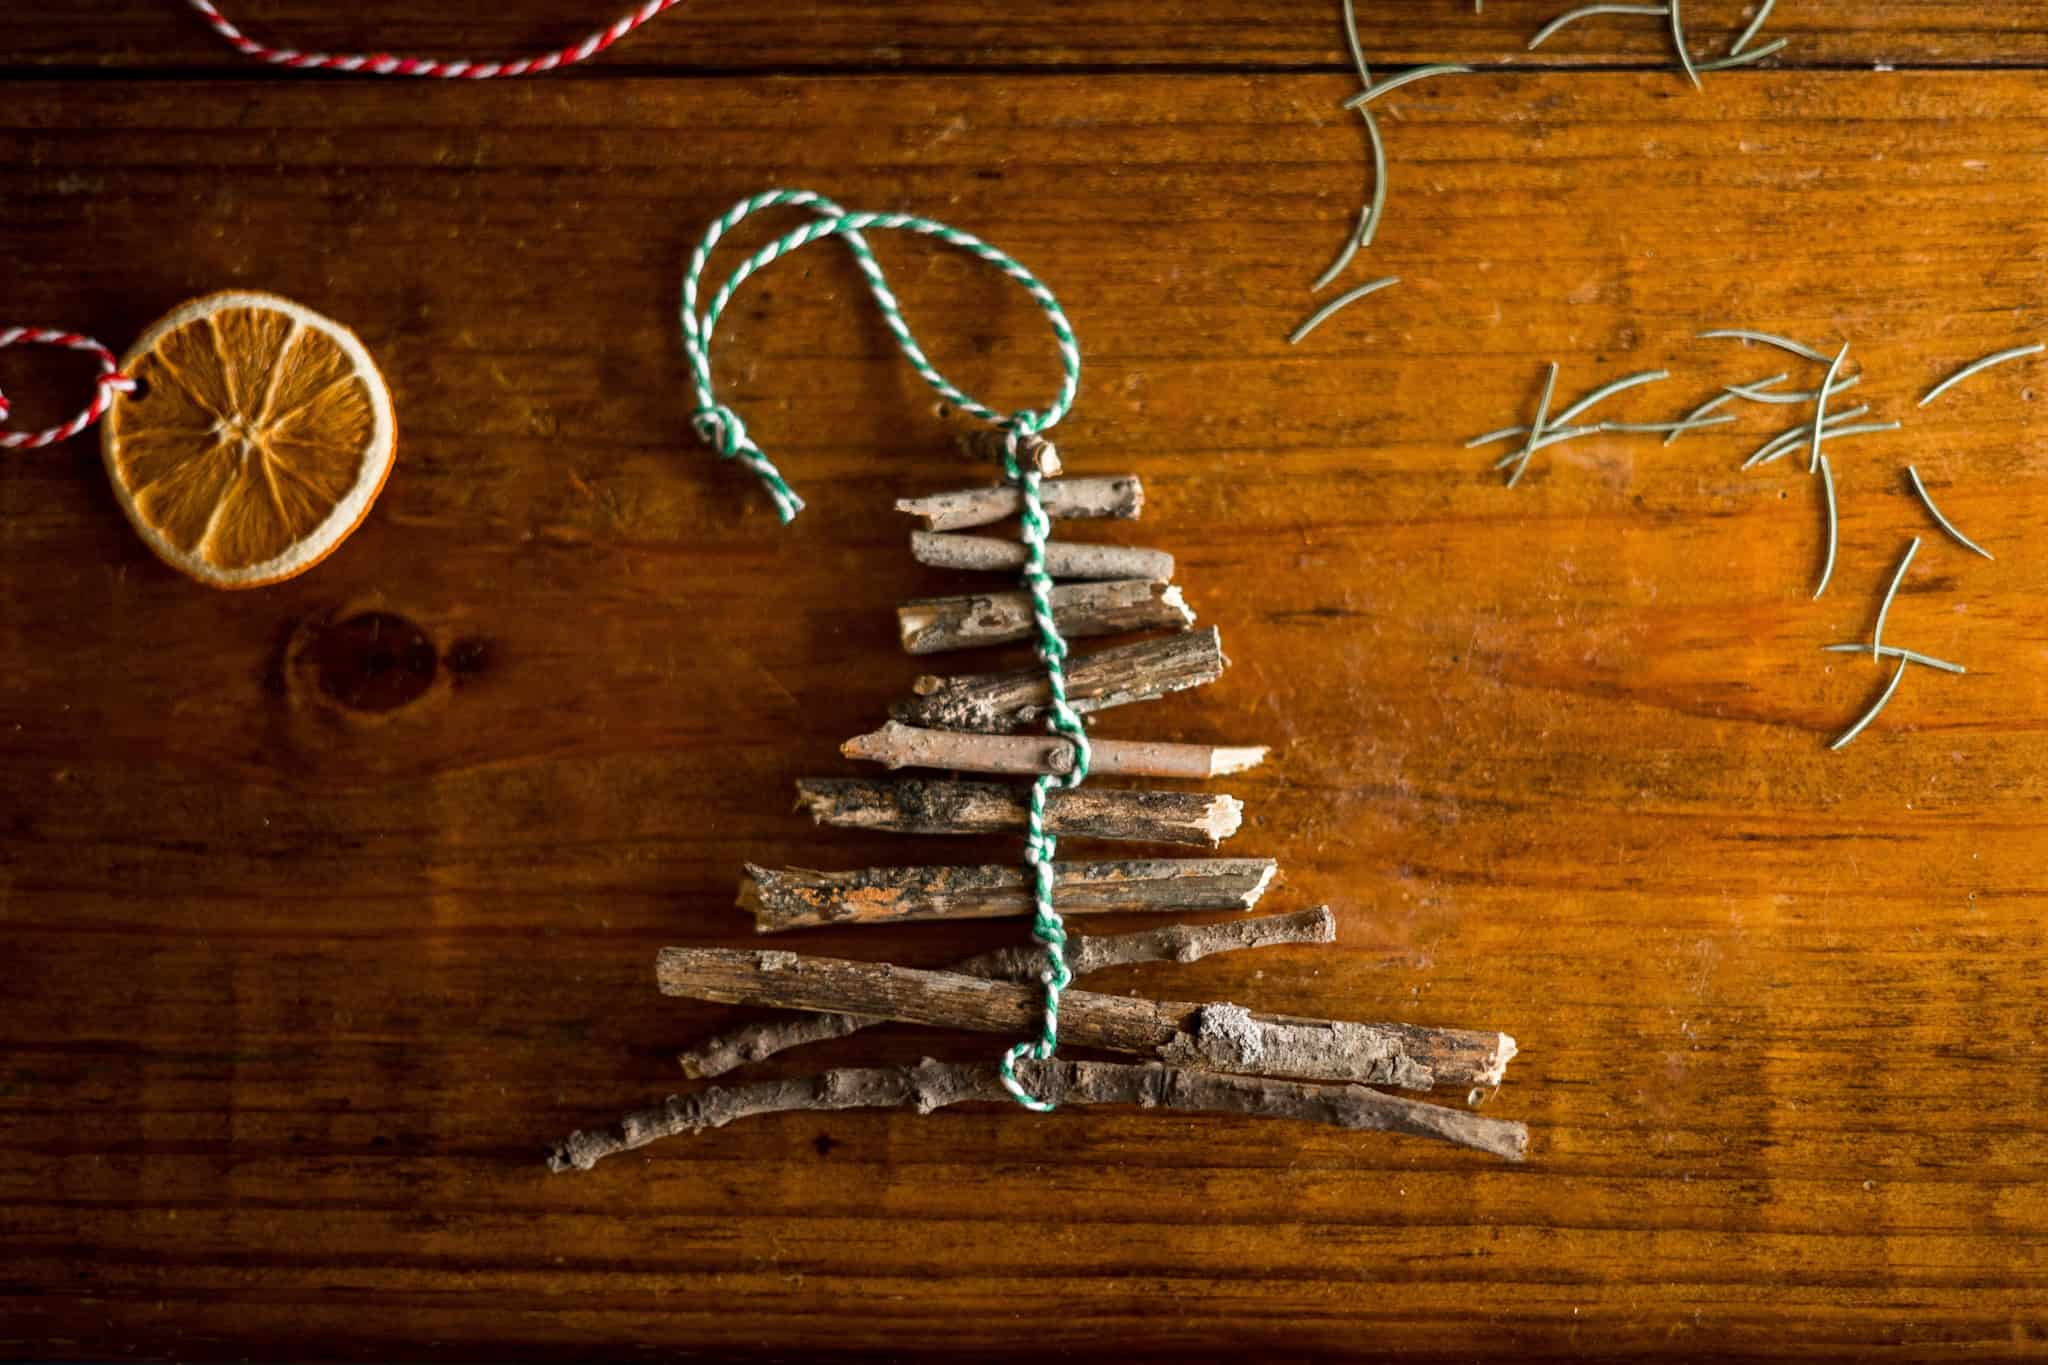 Christmas tree made of sticks and string -diy nature inspired holiday ornaments for kids